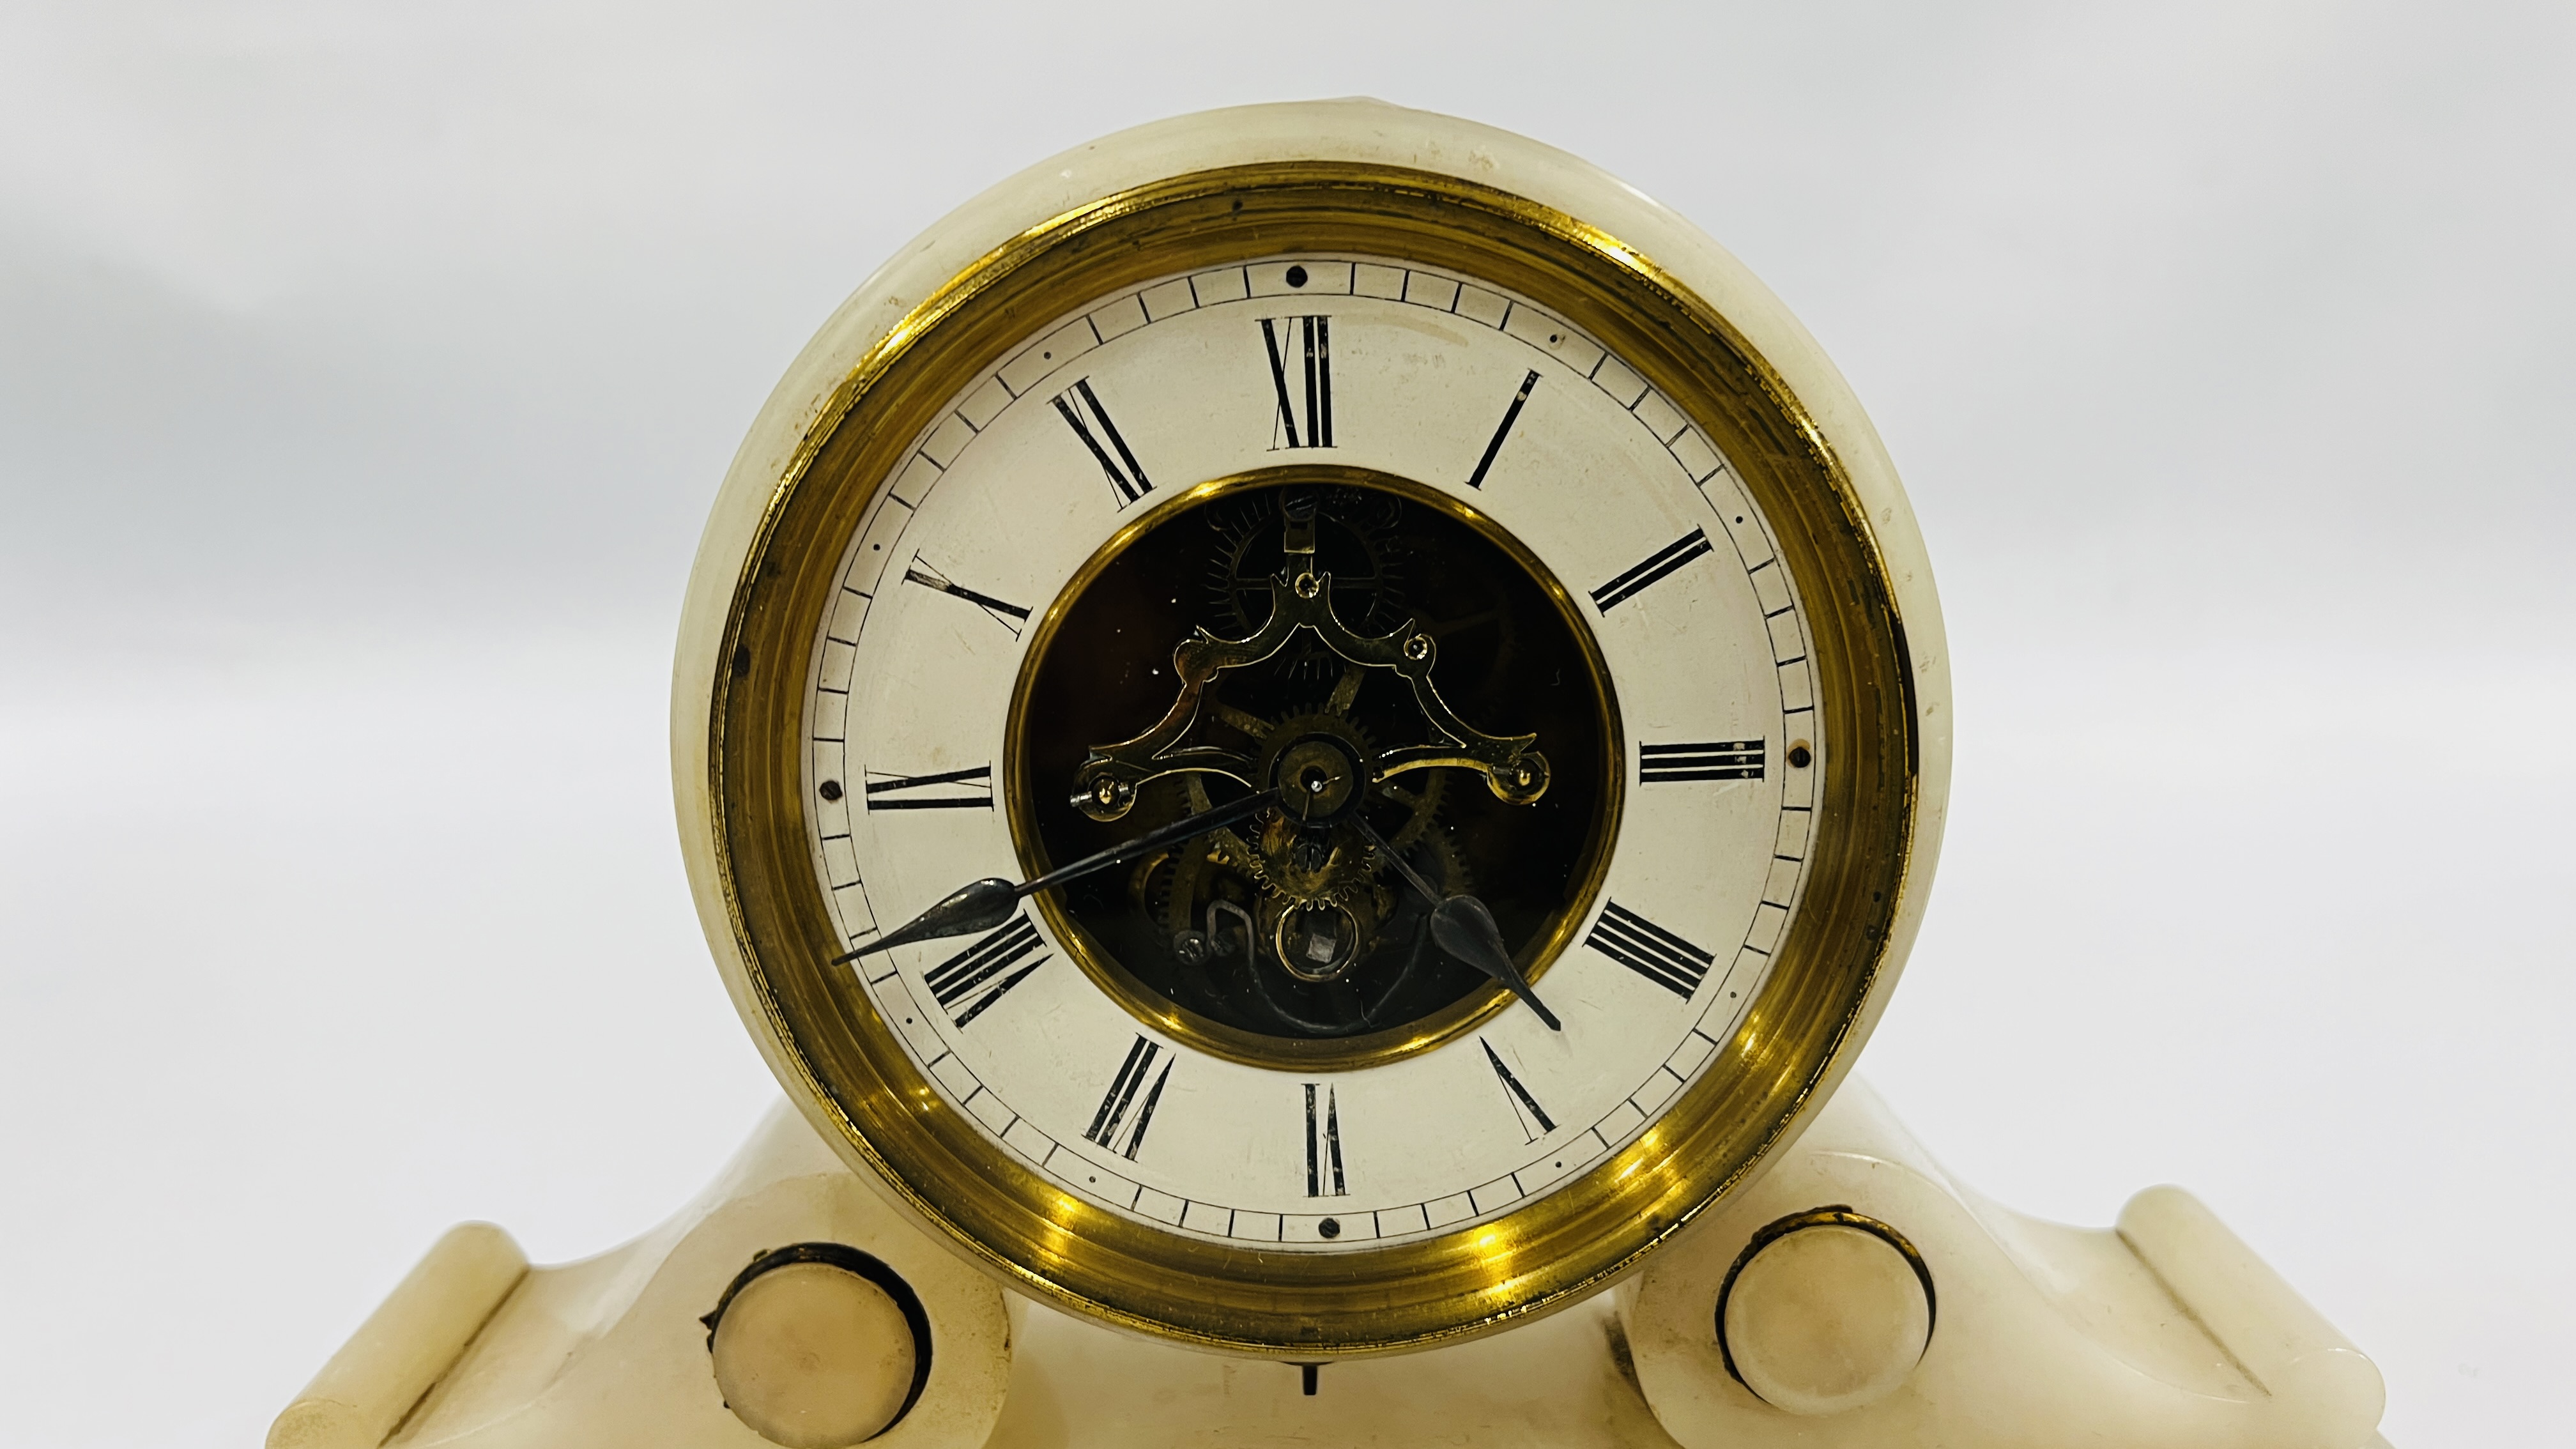 A FRENCH ALABASTER MANTEL CLOCK MARKED BREVETE SGDG WITH KEY - H 22CM X W 27CM. - Image 2 of 4